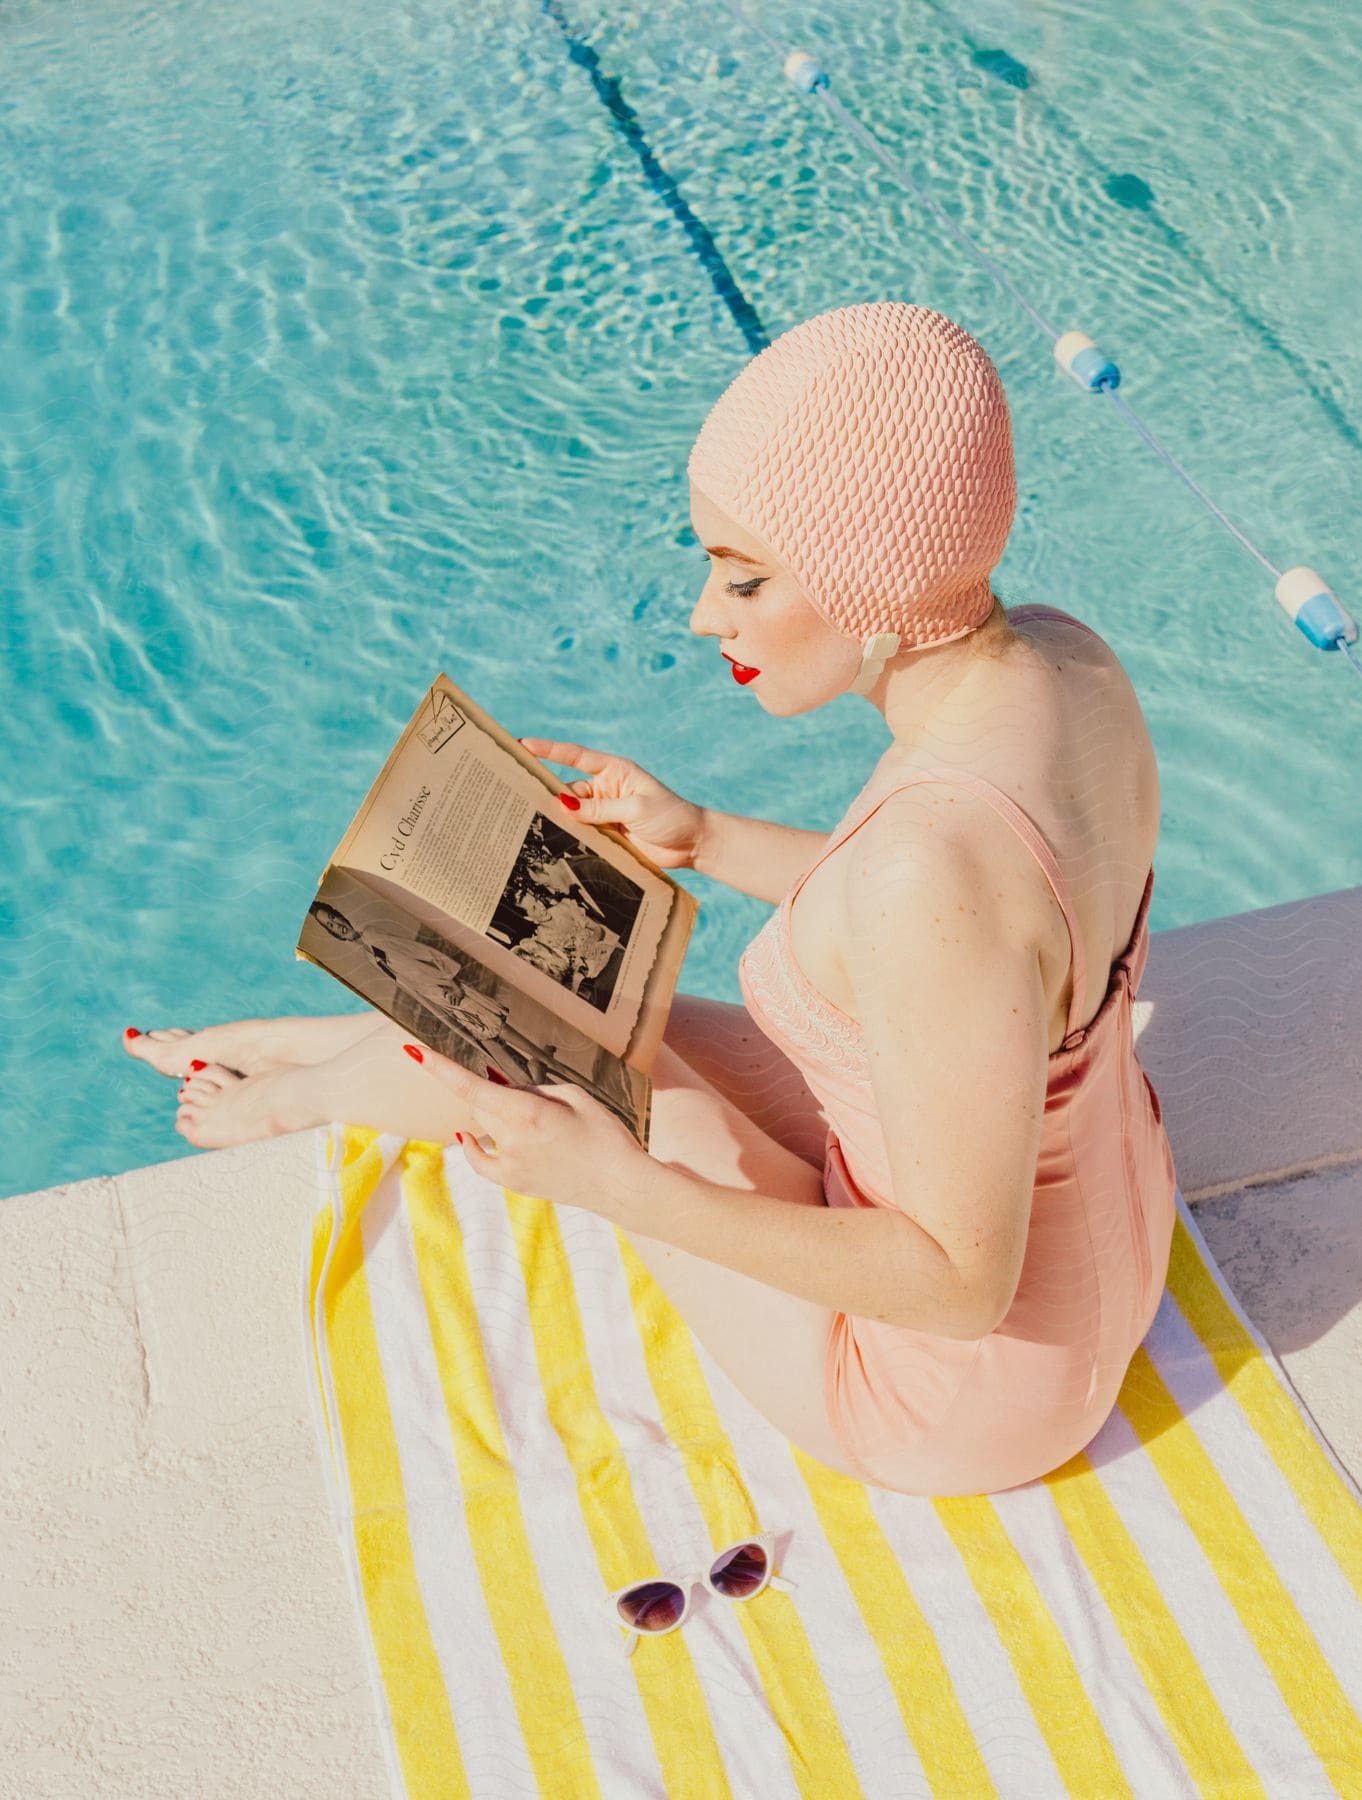 A woman modeling some classic swimwear next to a pool.